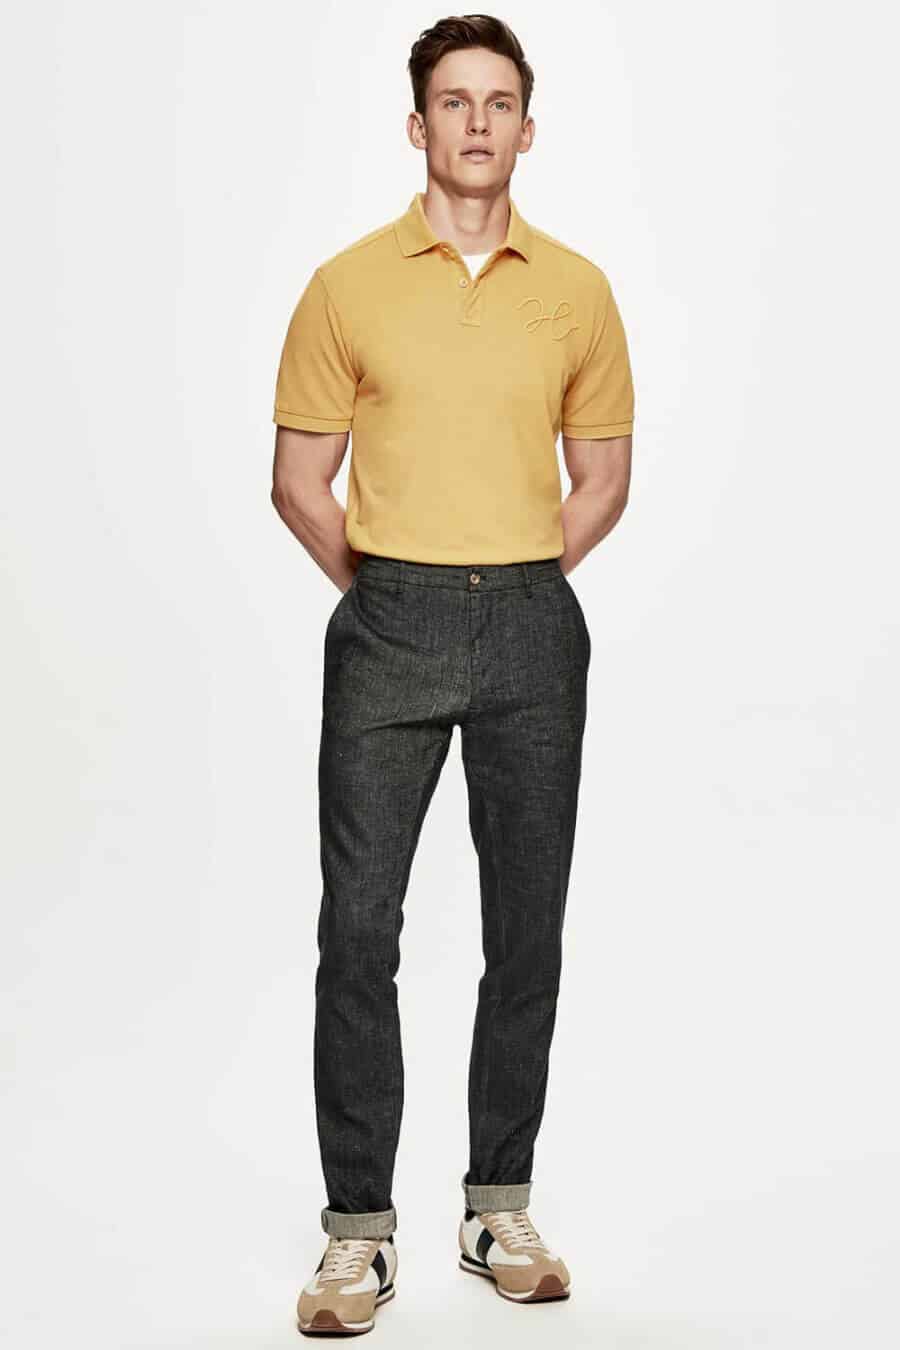 Men's bold yellow polo shirt with grey jeans and running shoes outfit